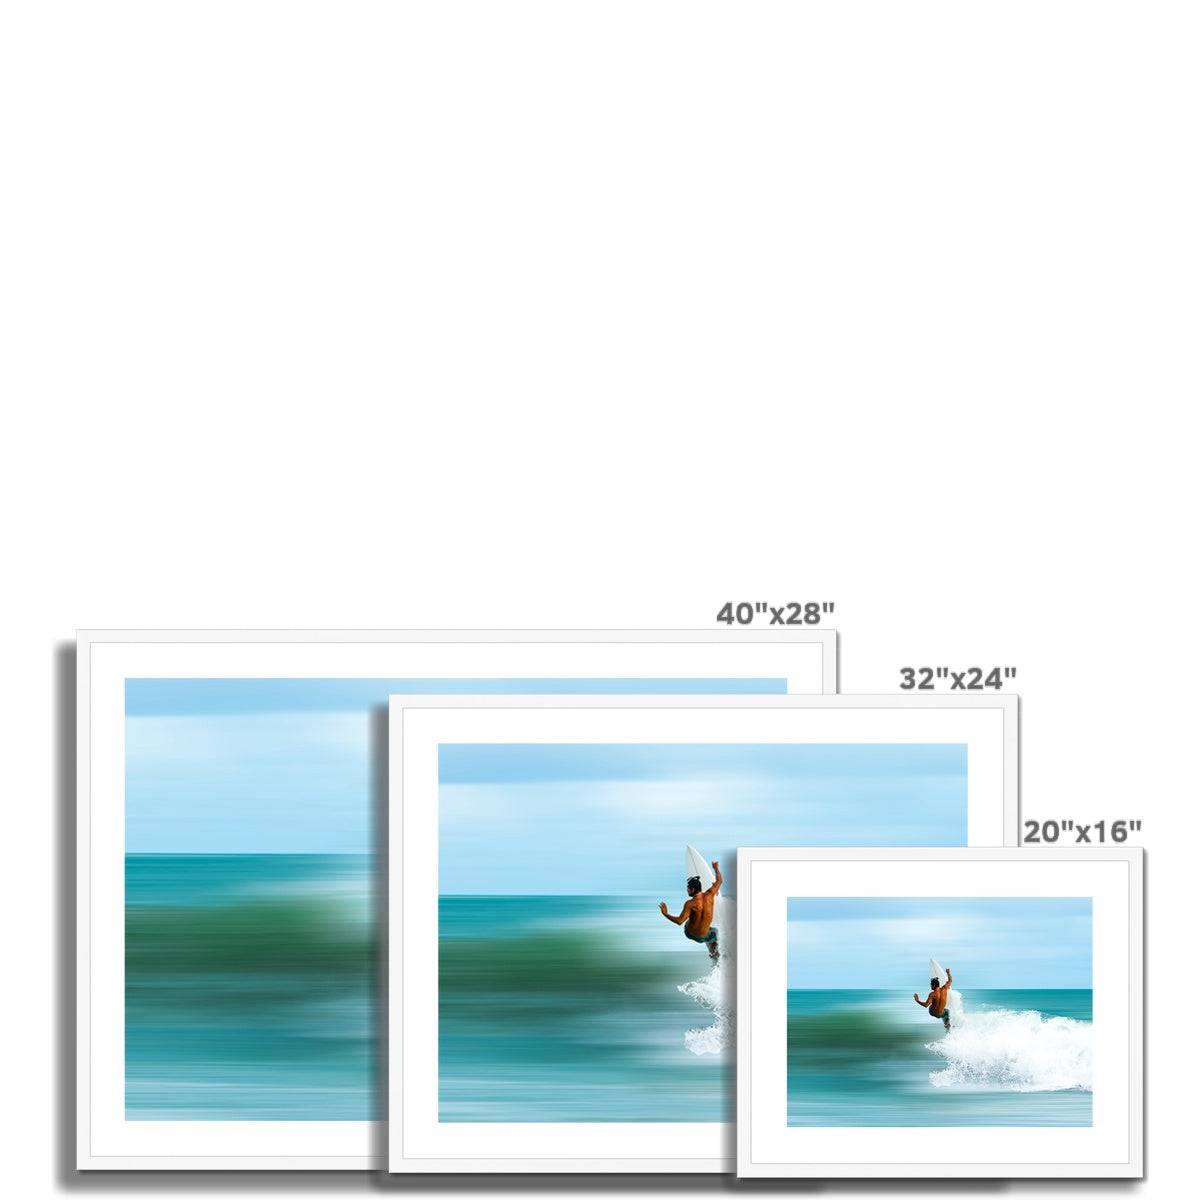 Free Wave Framed & Mounted Print - Pixel Gallery